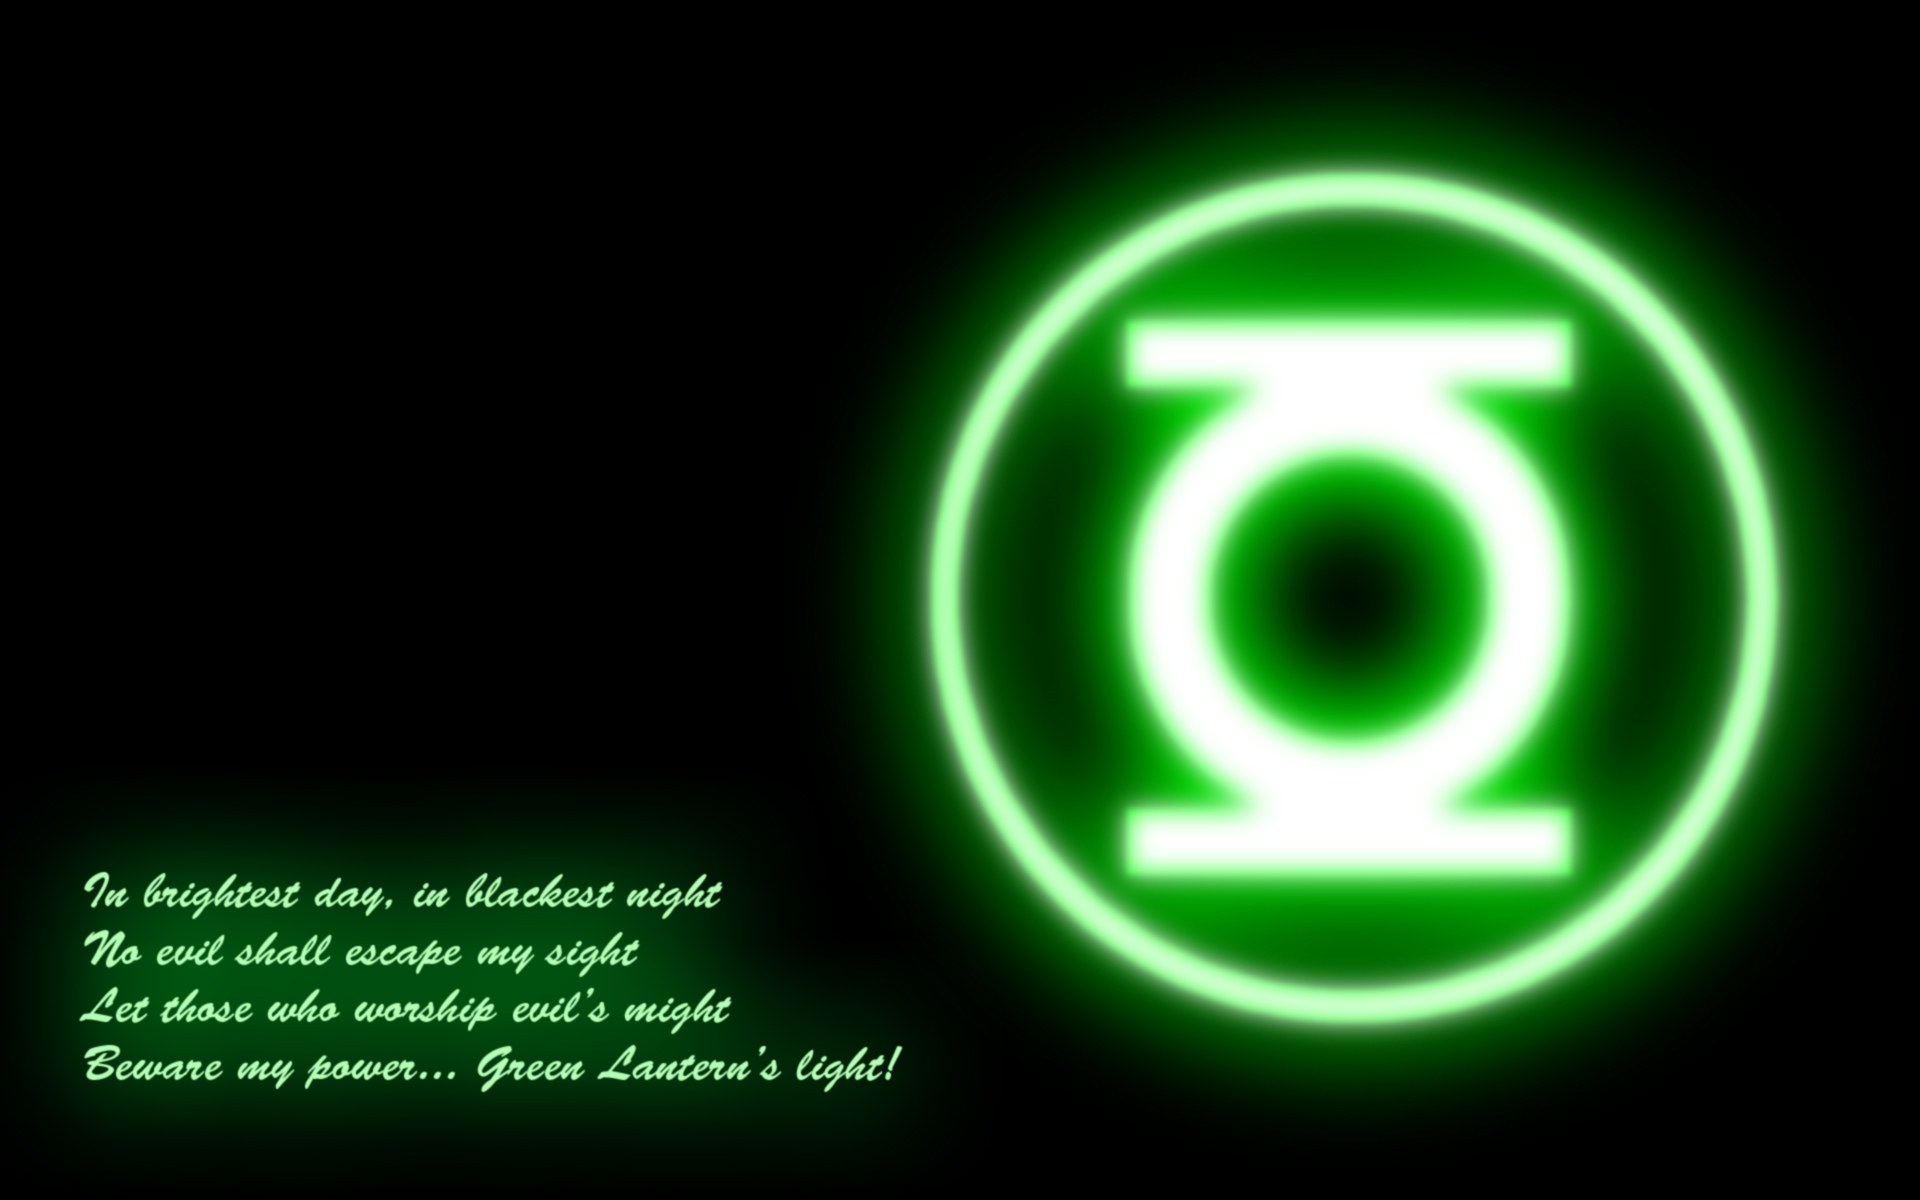 Green Lantern iPhone Wallpaper Image Amp Pictures Becuo